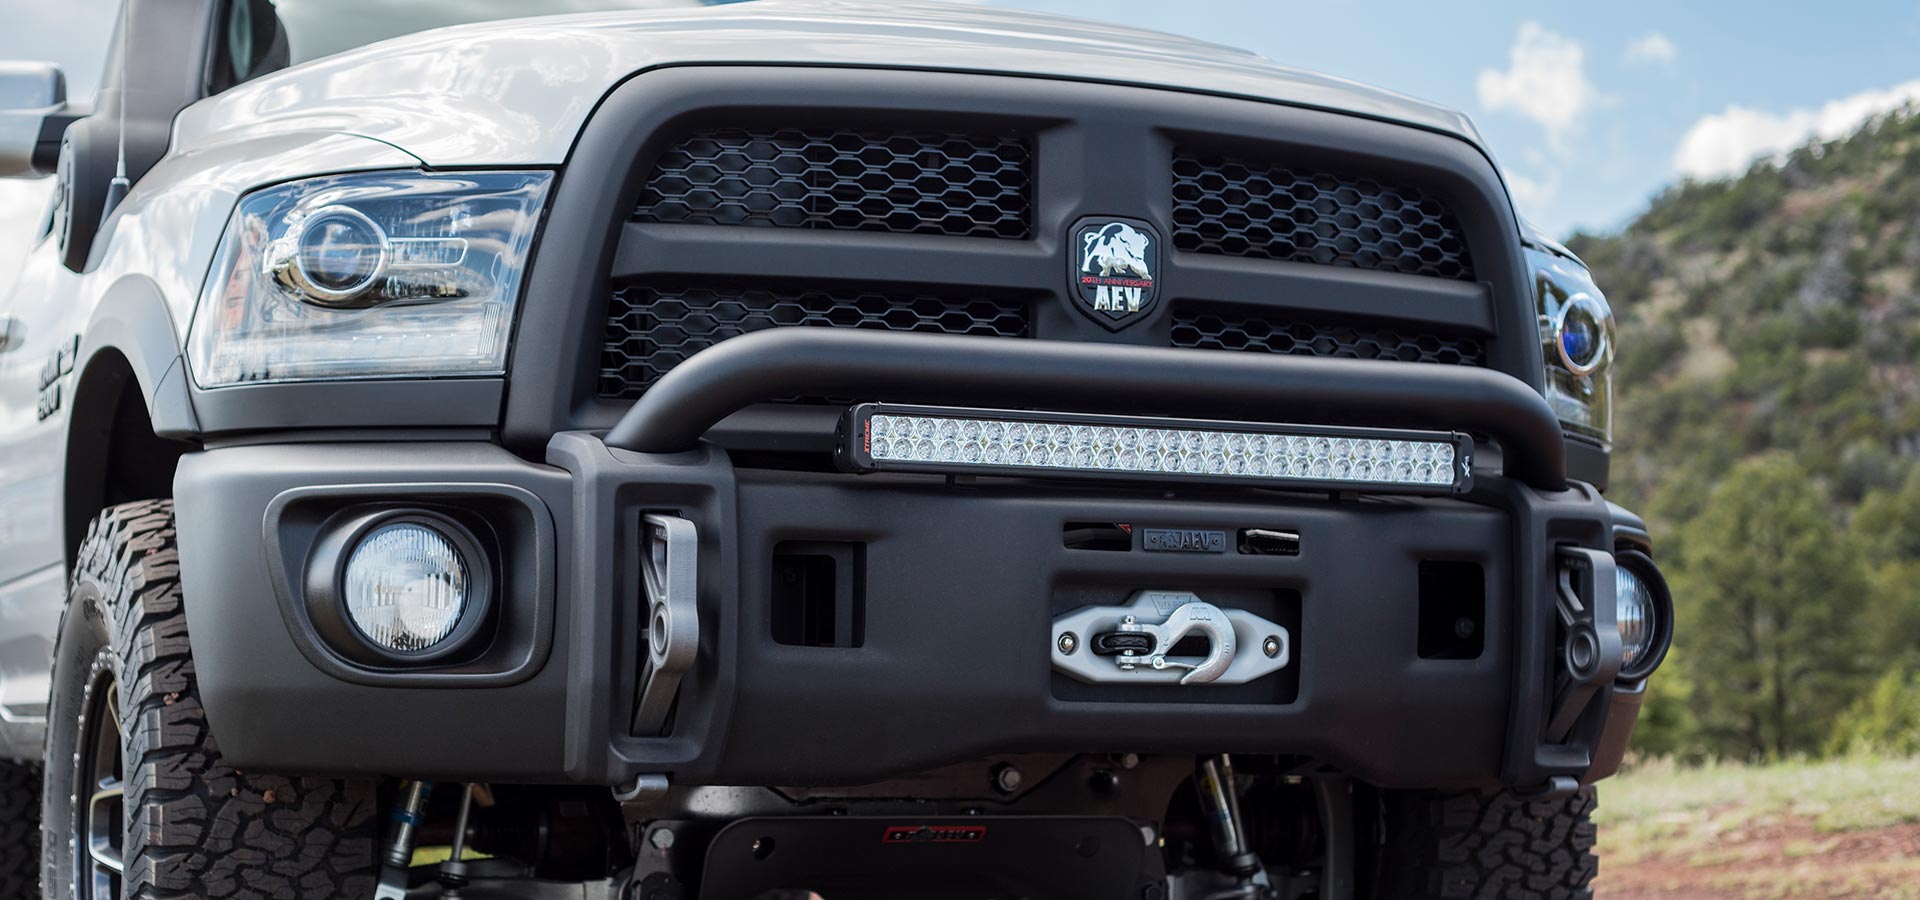 Ram 1500 Front Bumper American Expedition Vehicles AEV.